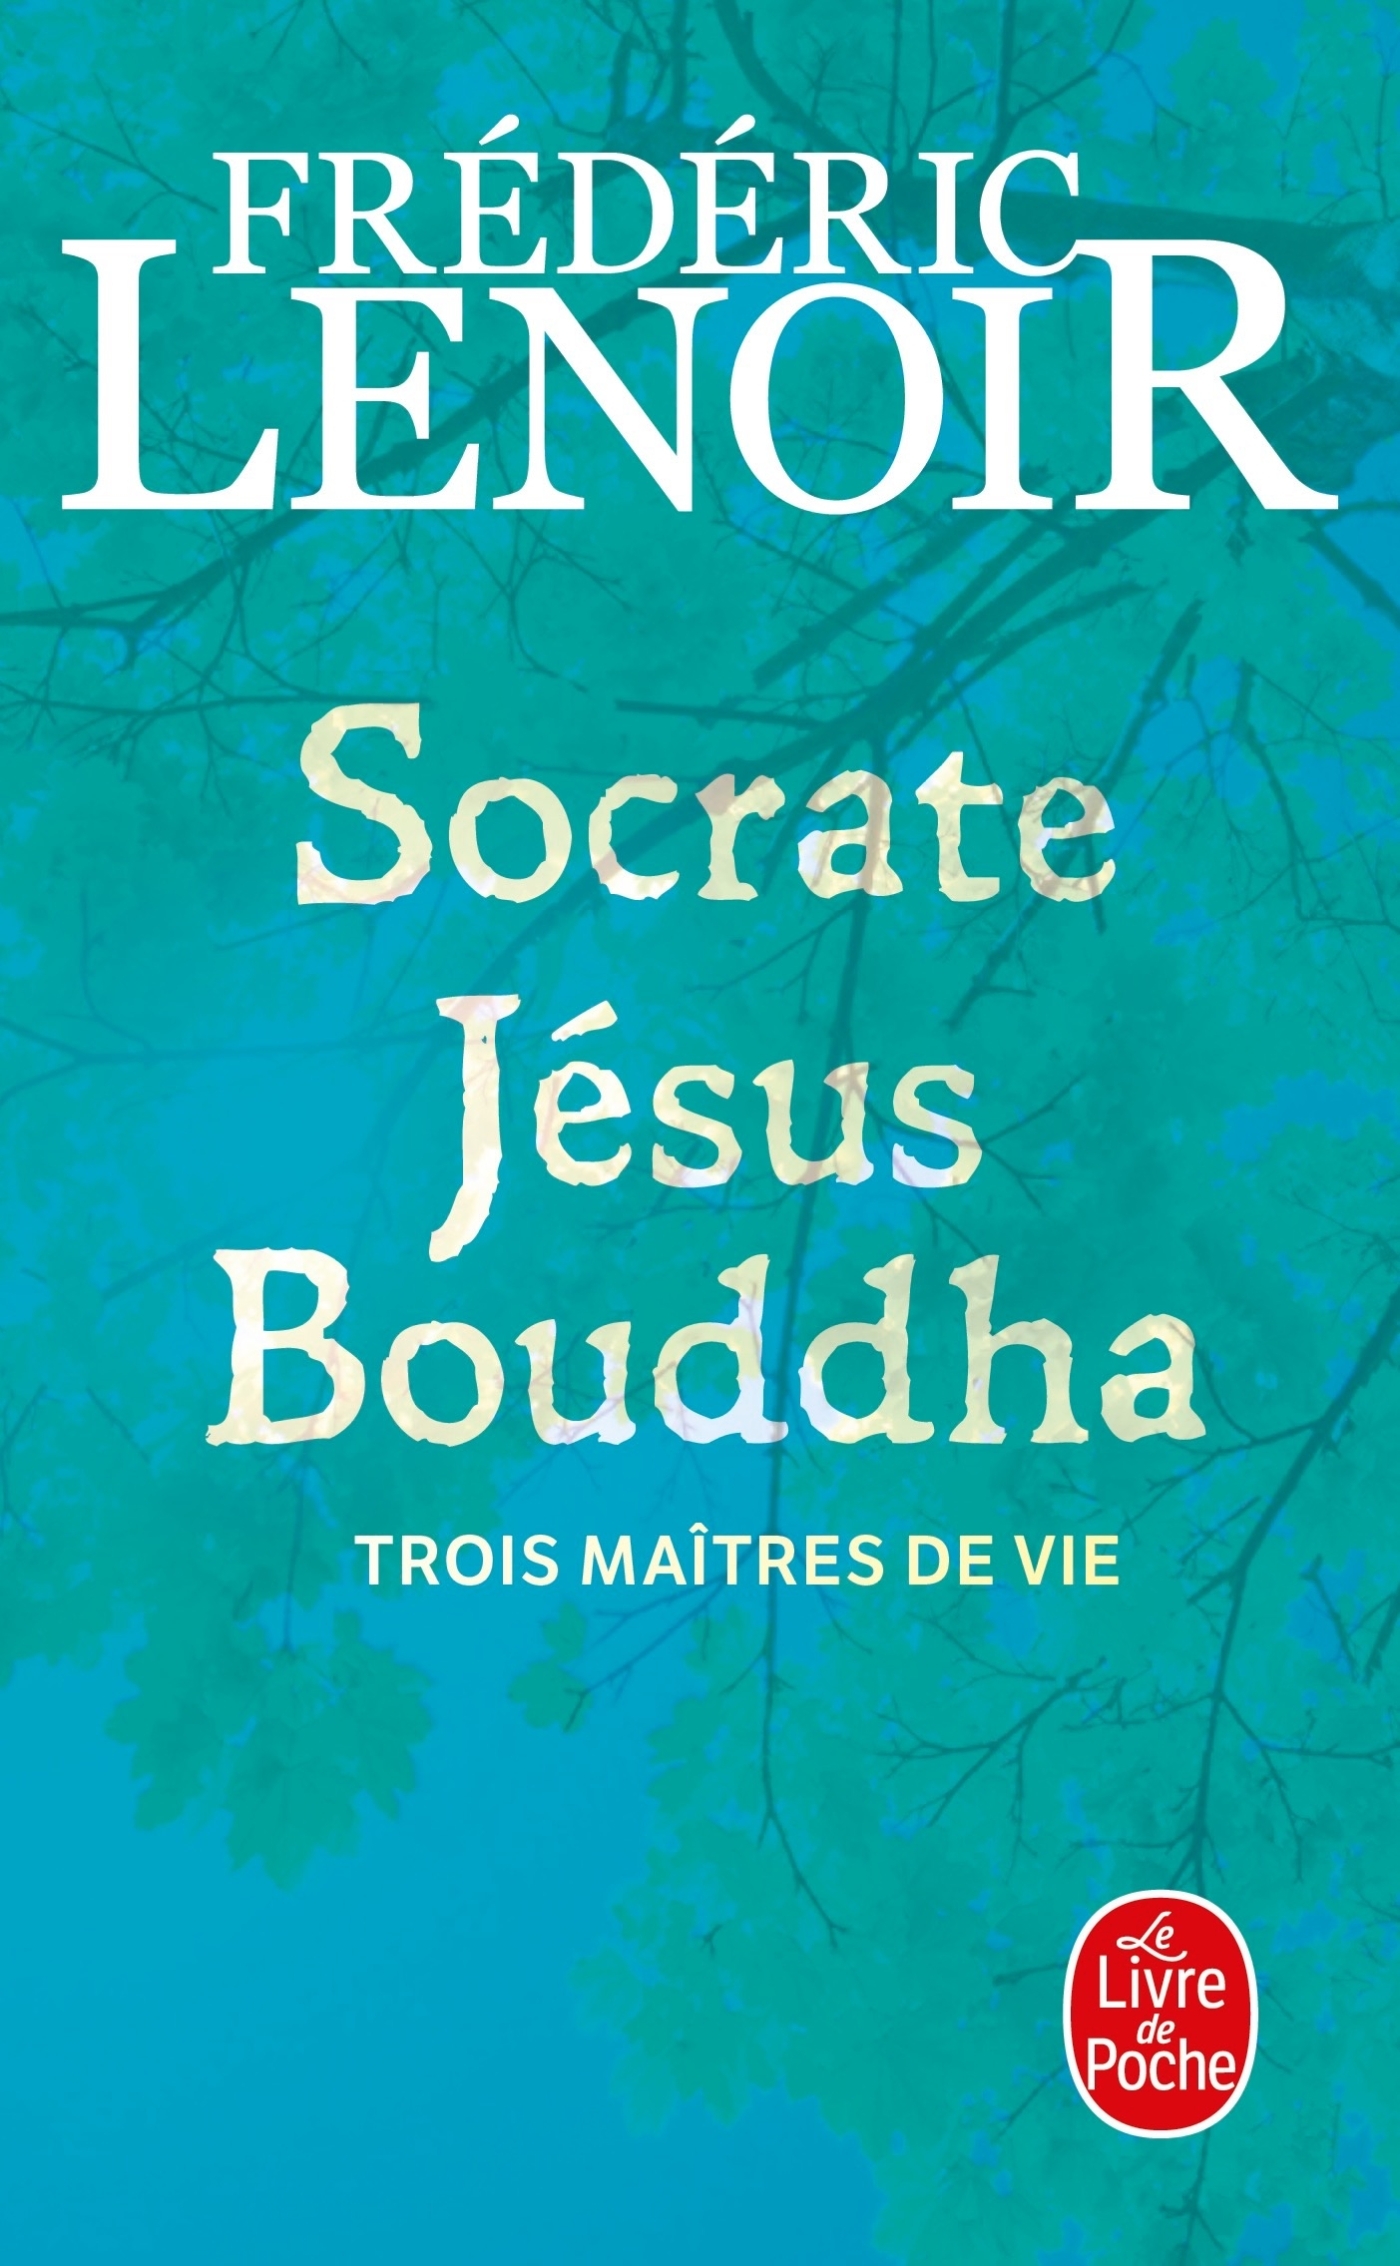 Socrate, Jésus, Bouddha (9782253134251-front-cover)